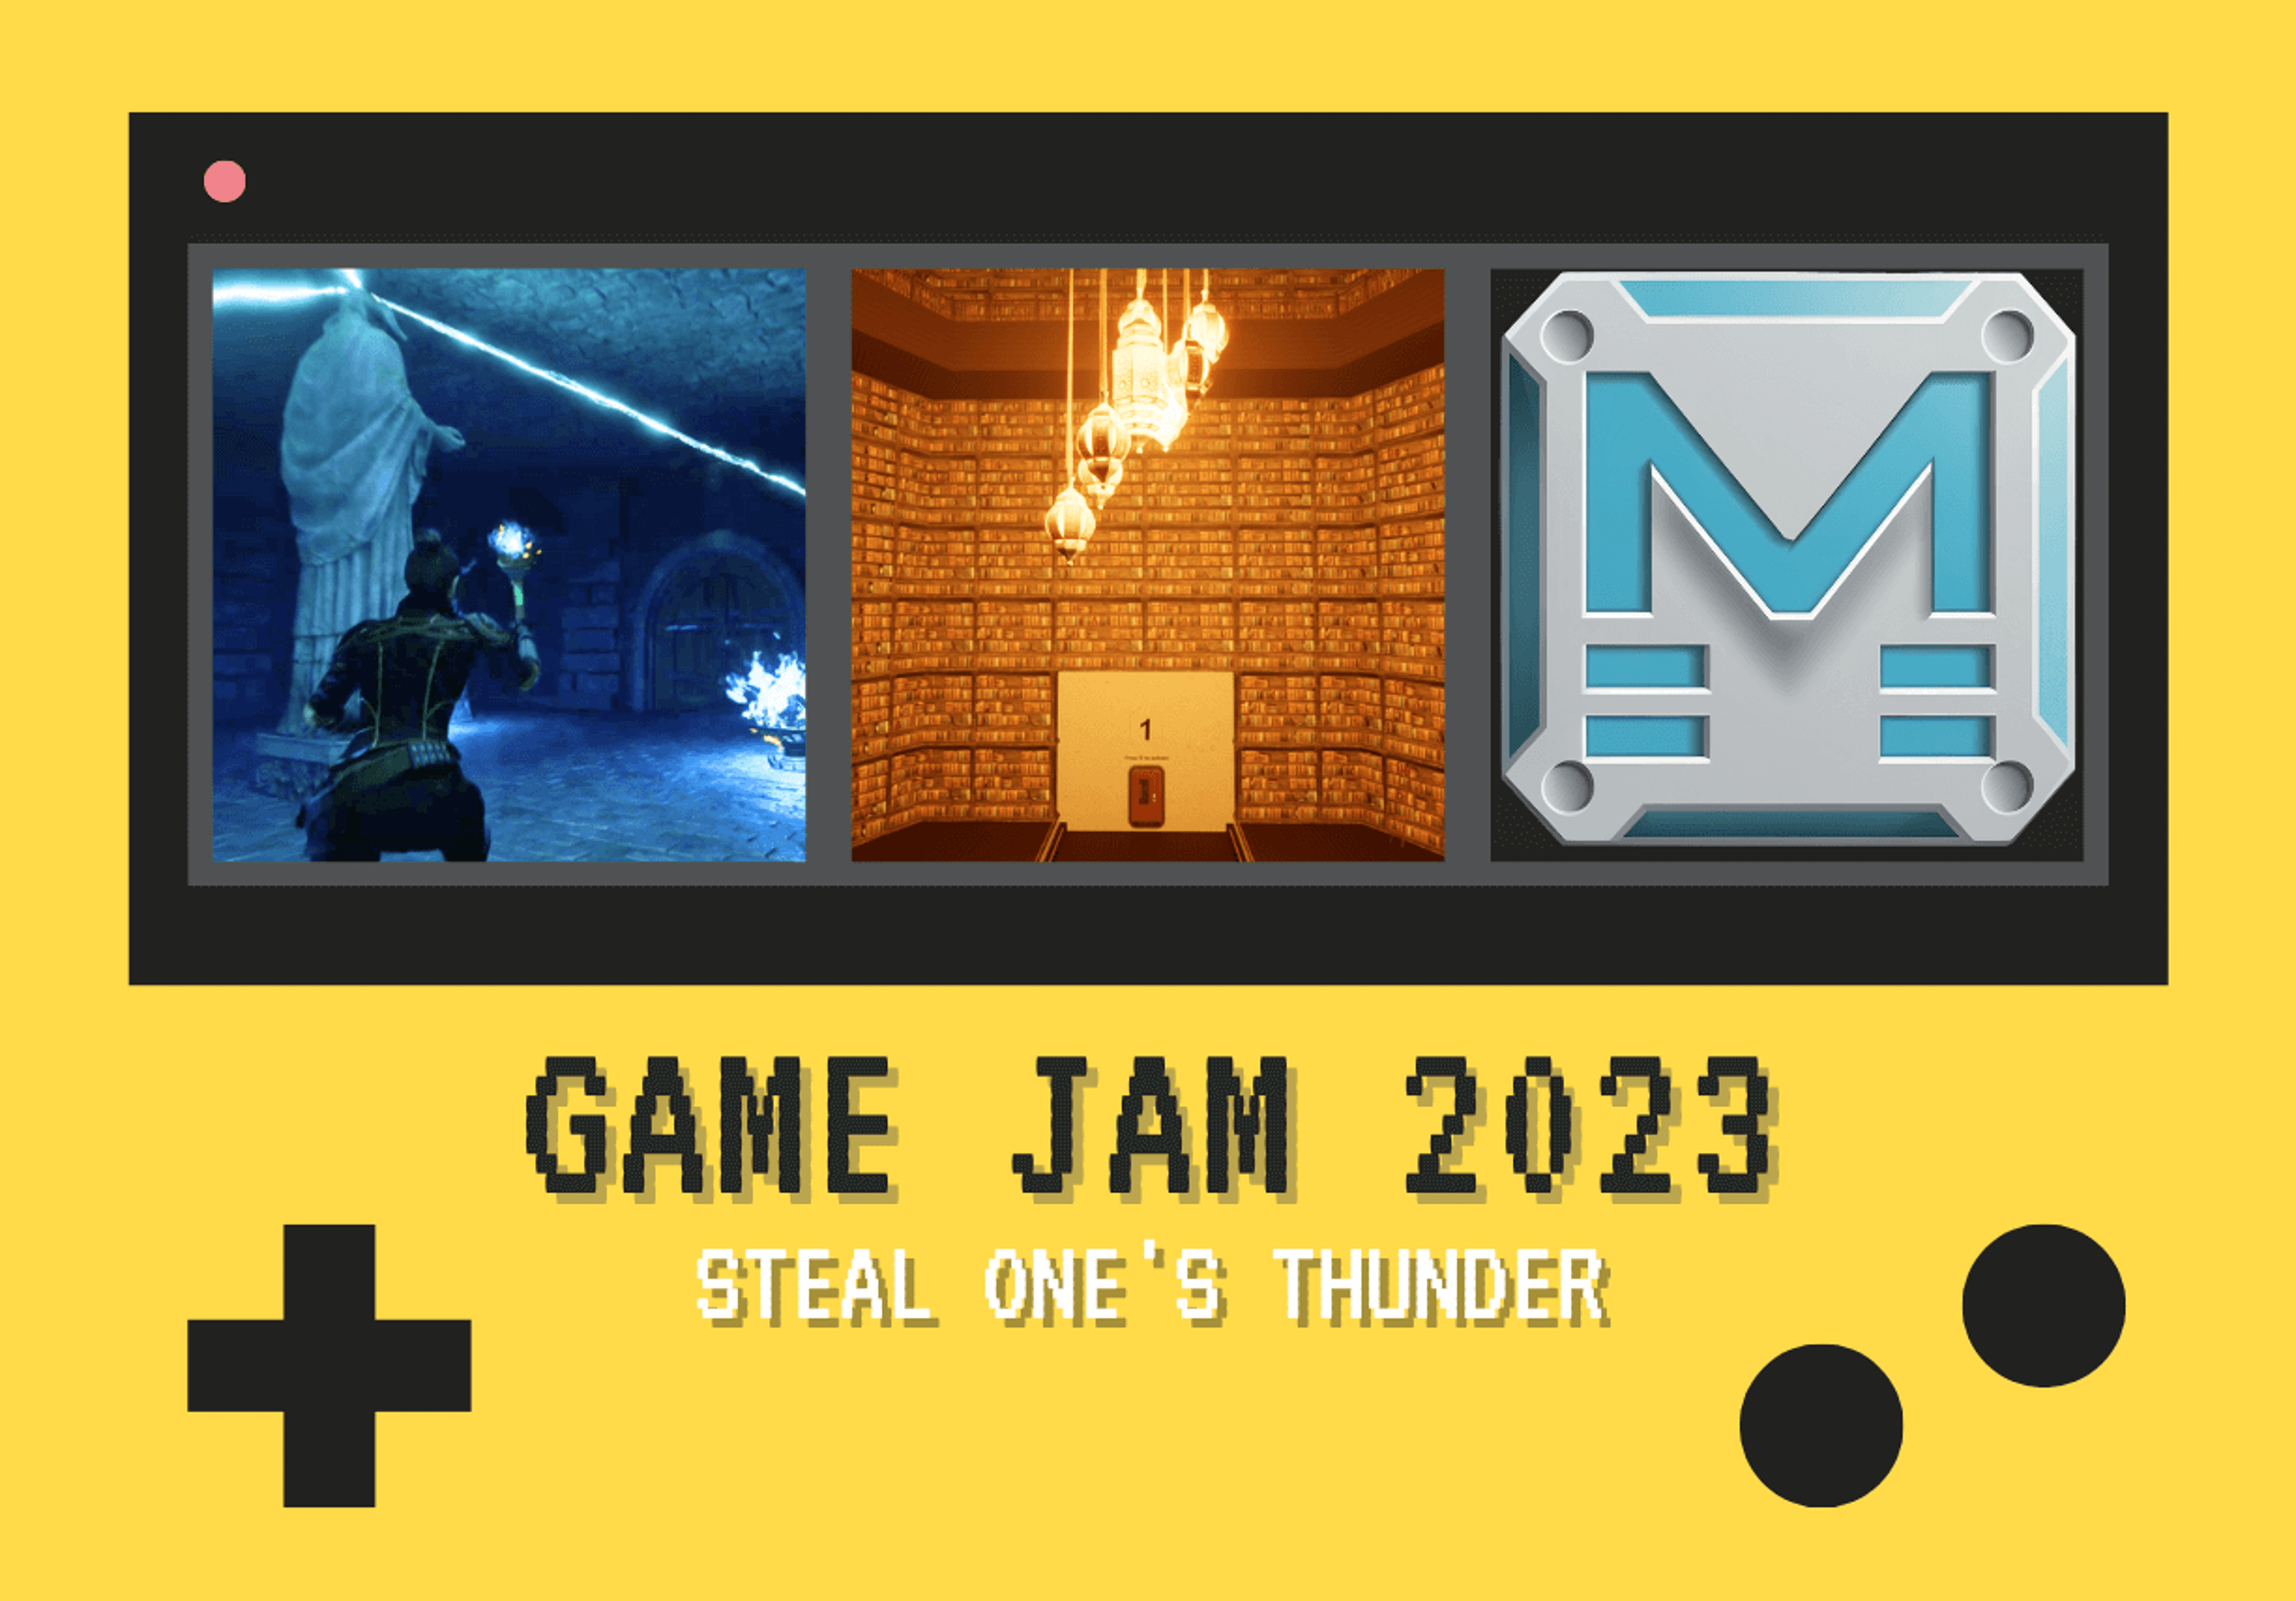 Promotional graphic for Game Jam 2023 showcasing the theme "Steal One's Thunder" with illustrative game design images.